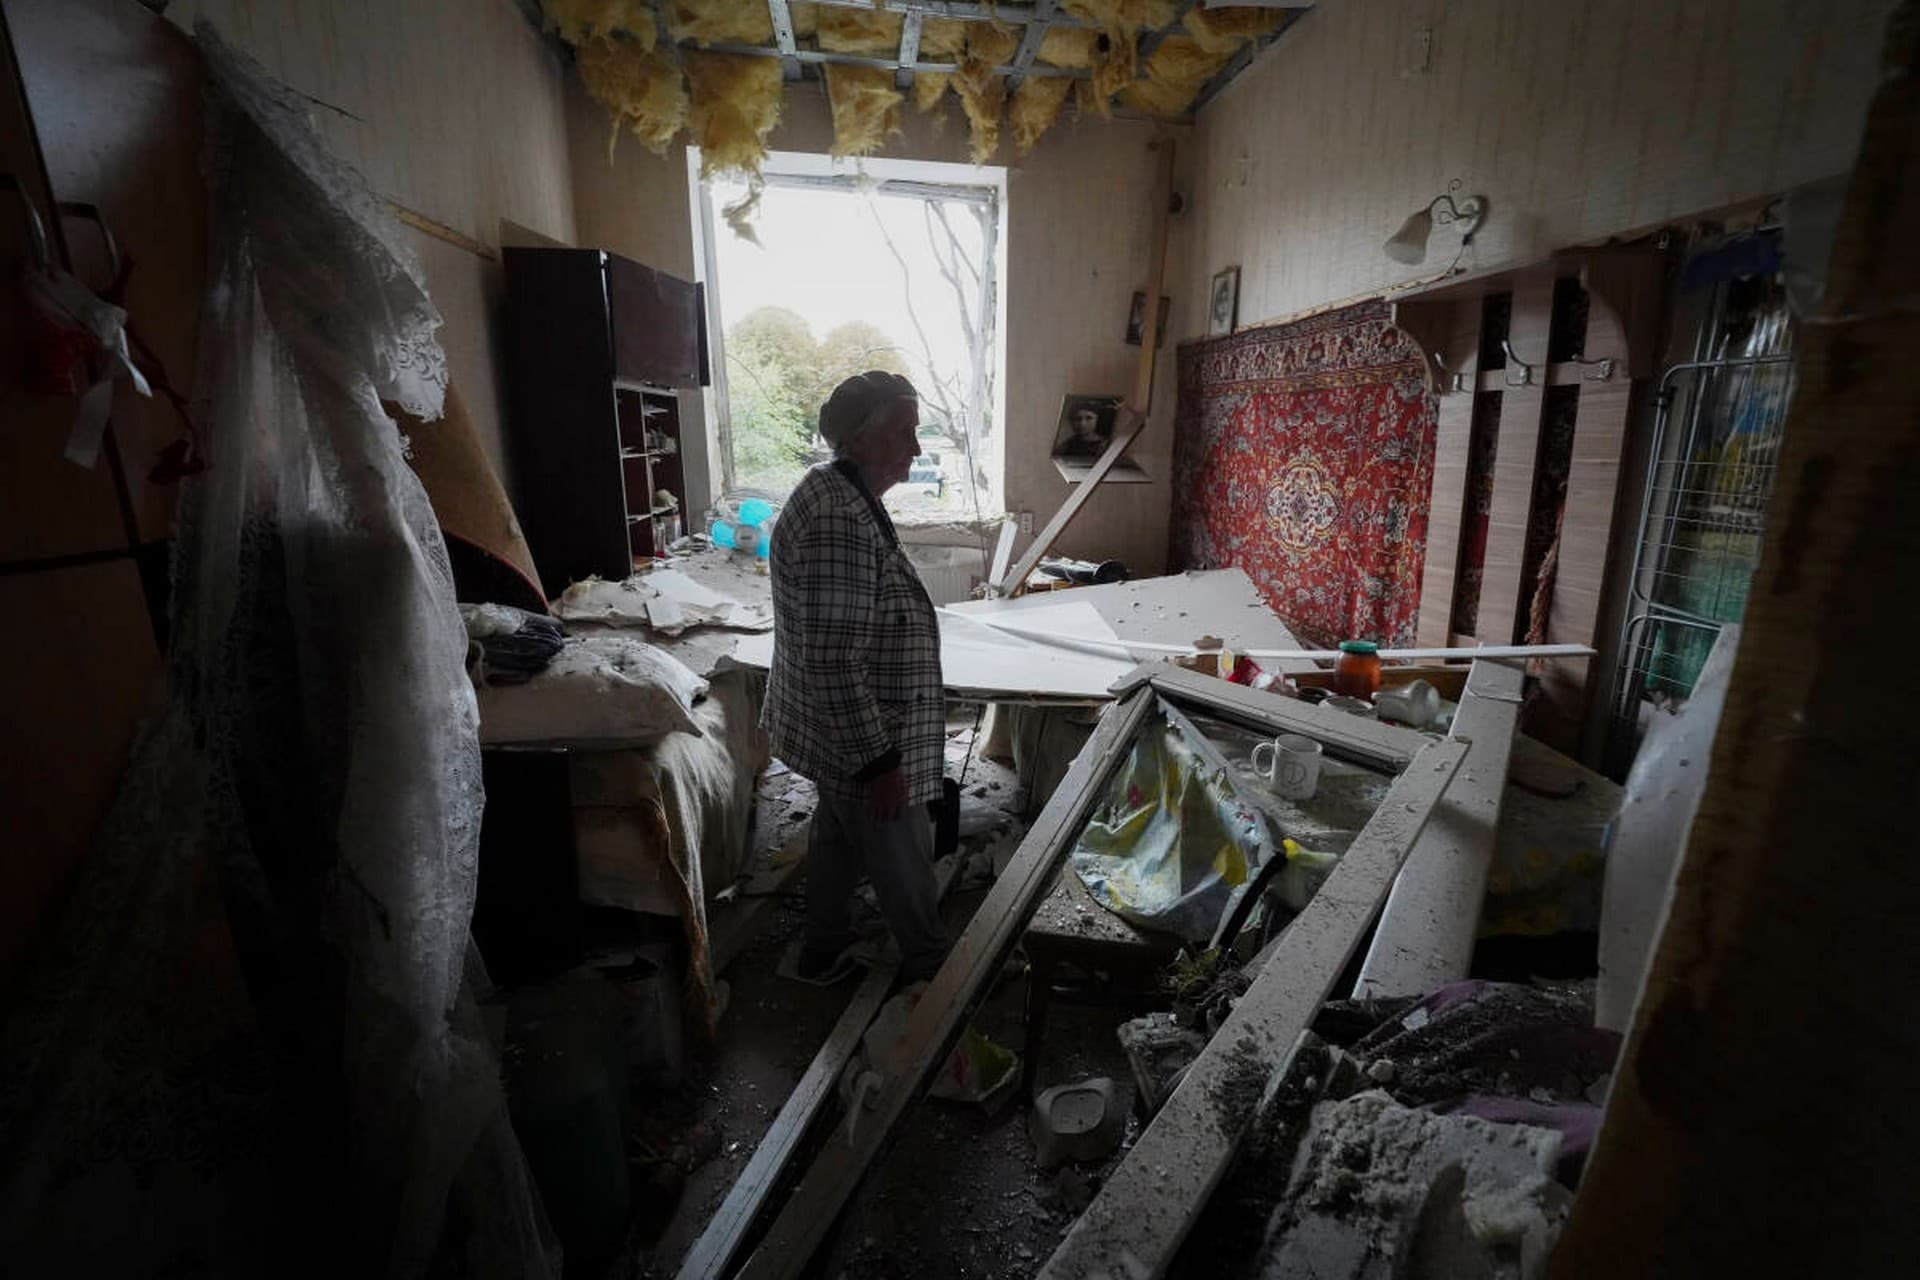 Irina Kuzkova stands in her flat at damaged building after latest Russian rocket attack in downtown Kharkiv